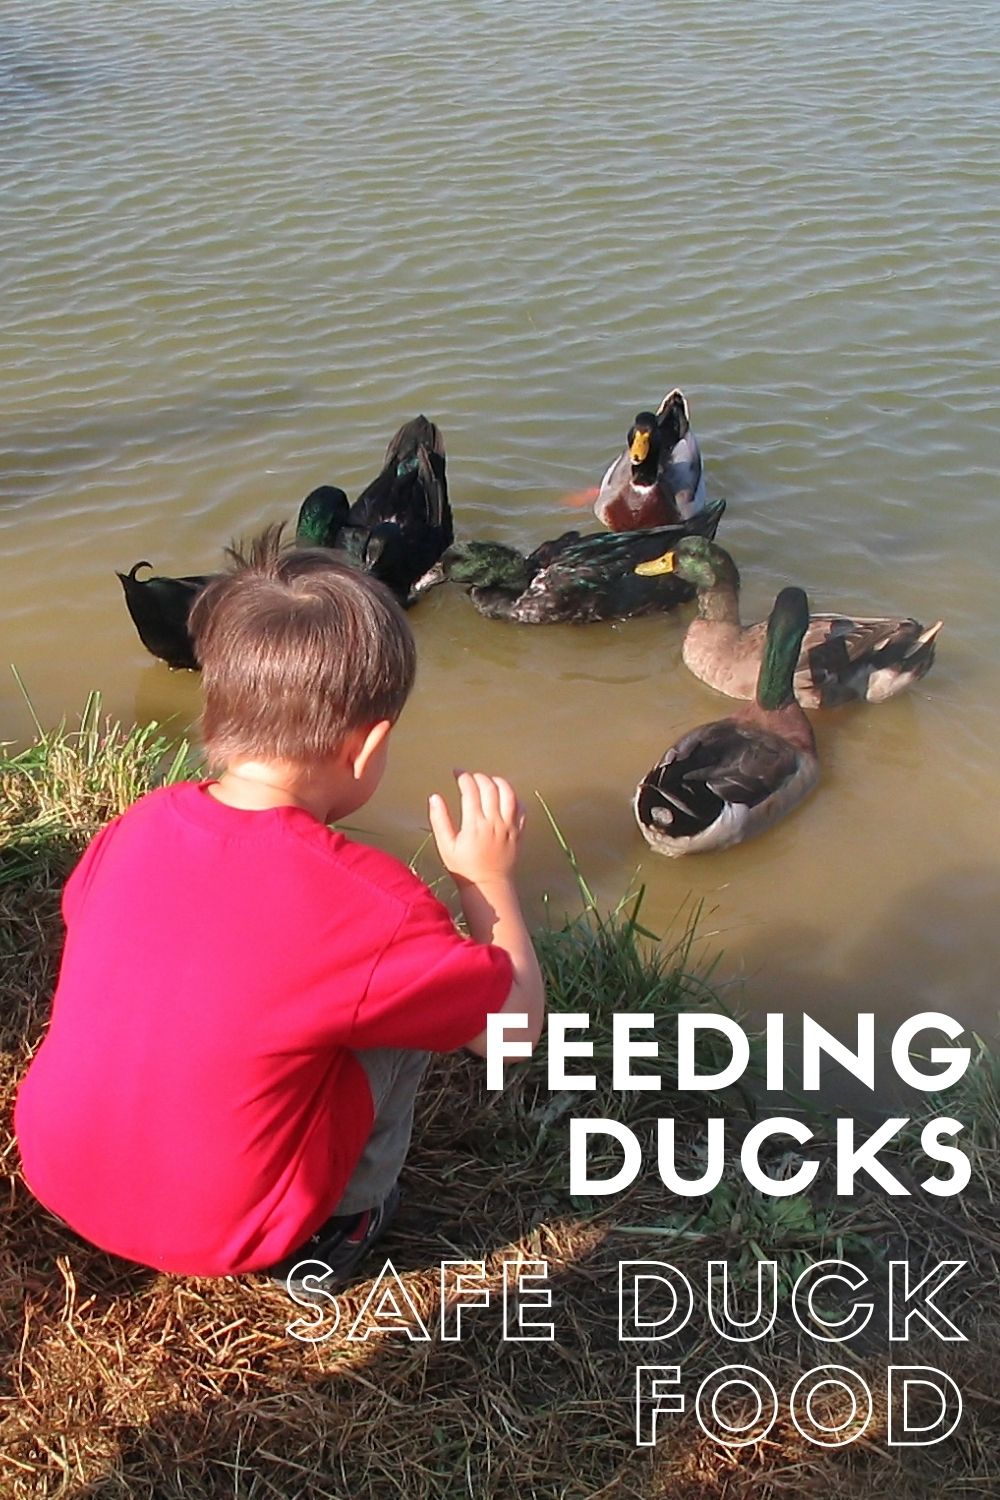 Where to feed ducks | What to feed ducks | what cant you feed ducks